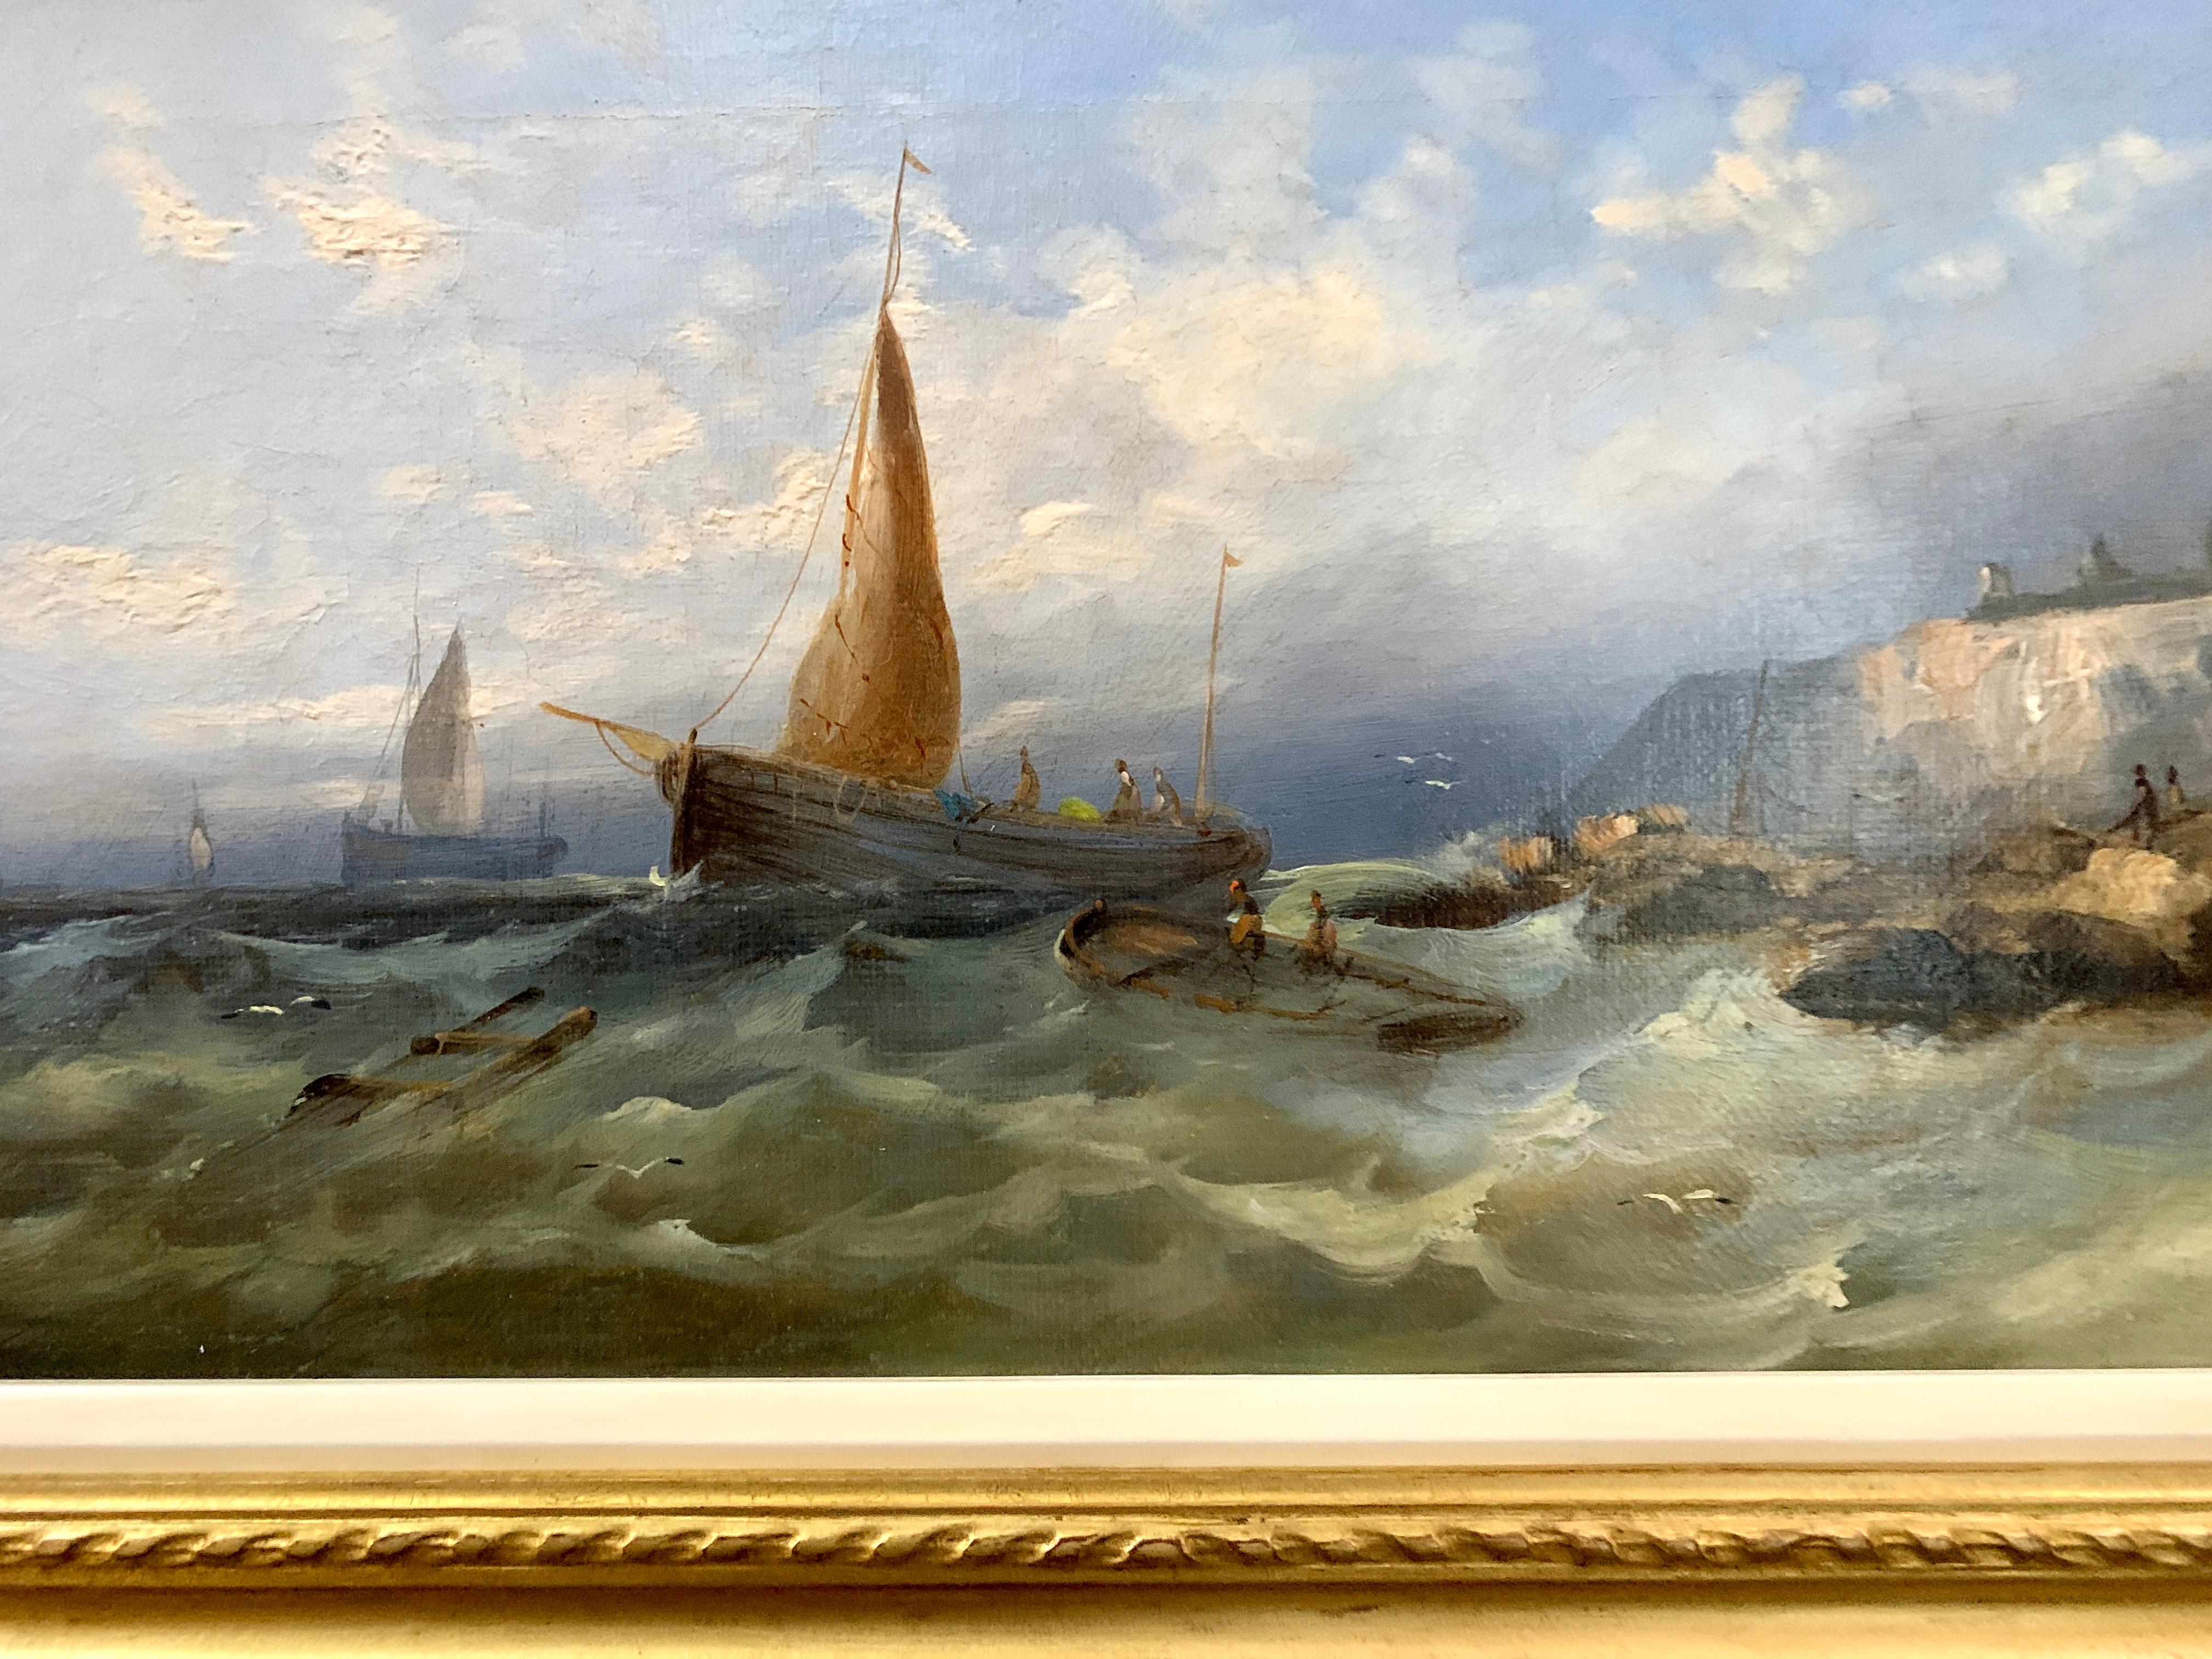 Antique 19th century English fishing vessels In the English Channel - Painting by William Henry Williamson